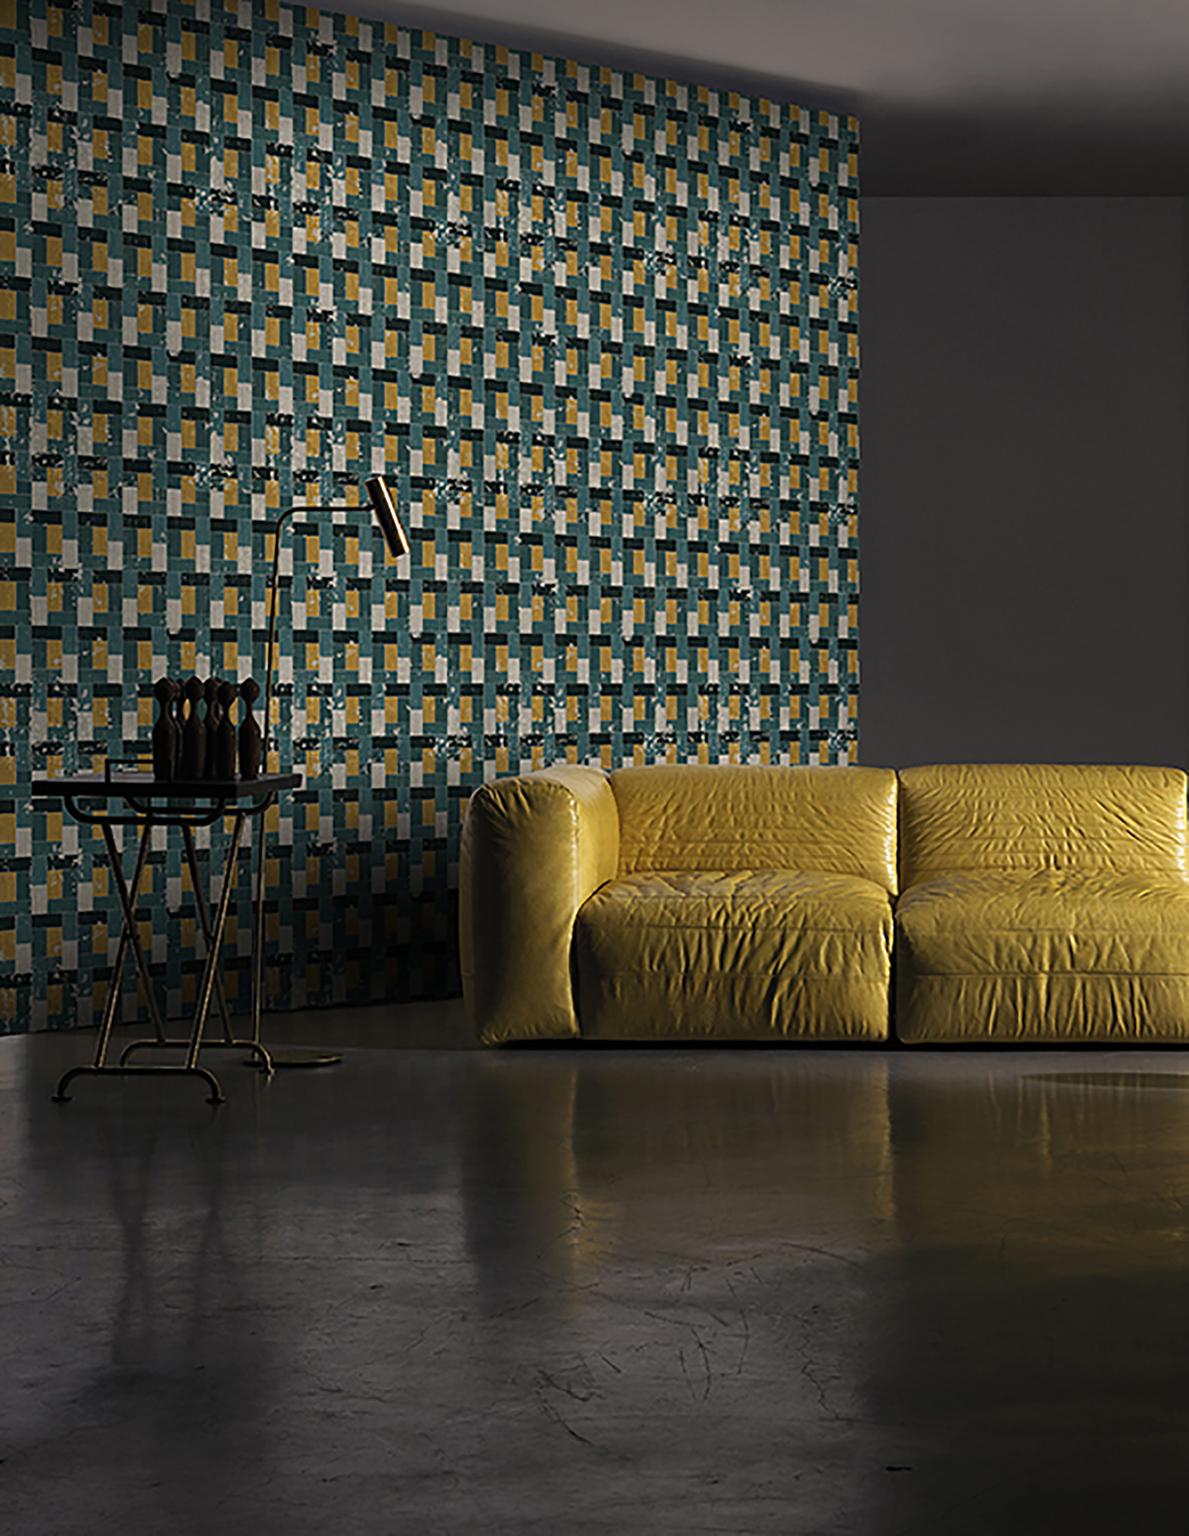 Wall&decò turns from photographs to wall paintings, from tromp-l'oeils to macro-designs on material backgrounds into a vertical wall pattern, with truly original visual effects.

Digital printed vinyl wallpaper with nonwoven backing

Roll size: